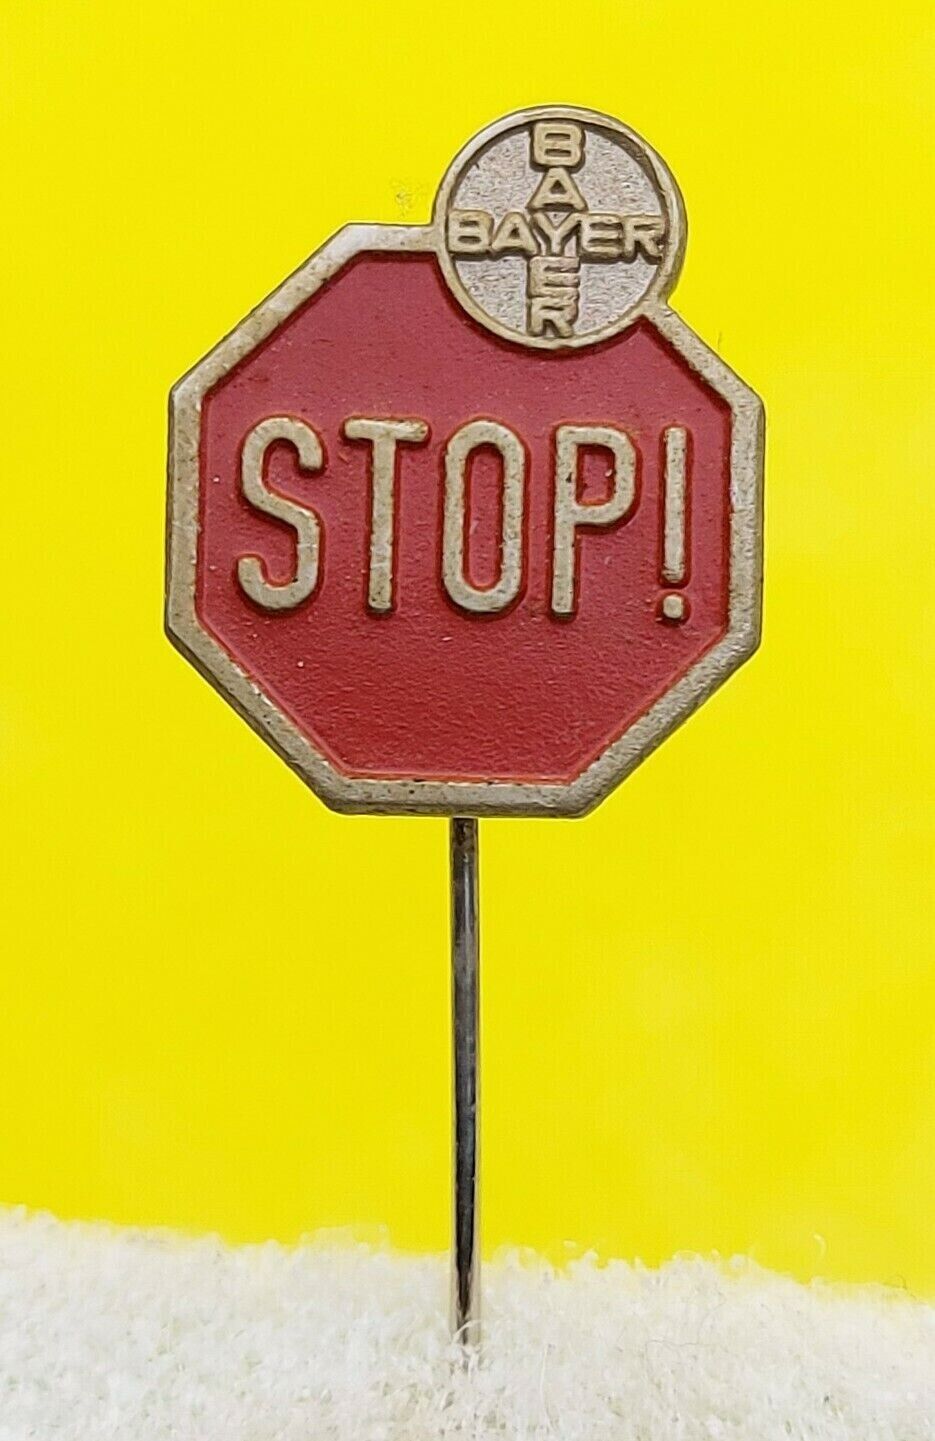 BAYER STOP - Germany, Pharmaceutical Chemicals , vintage pin, badge, abzeichen